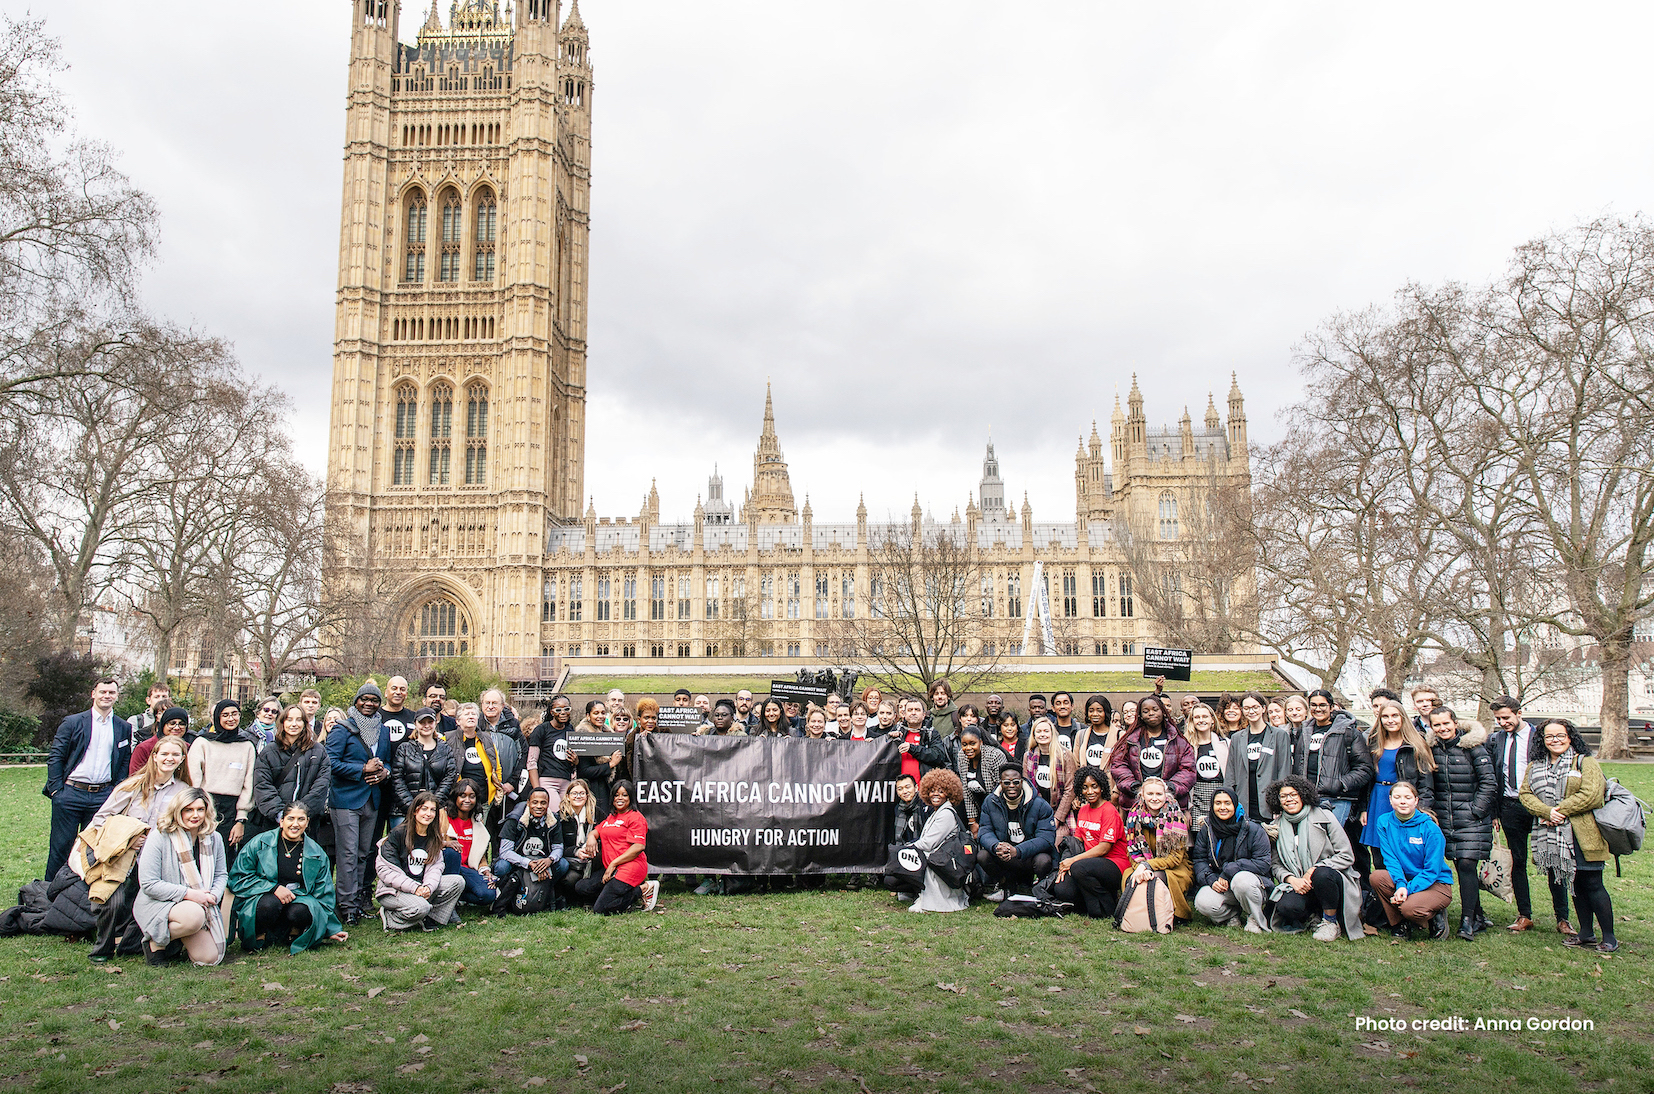 Five lessons for organising successful Parliamentary lobby days